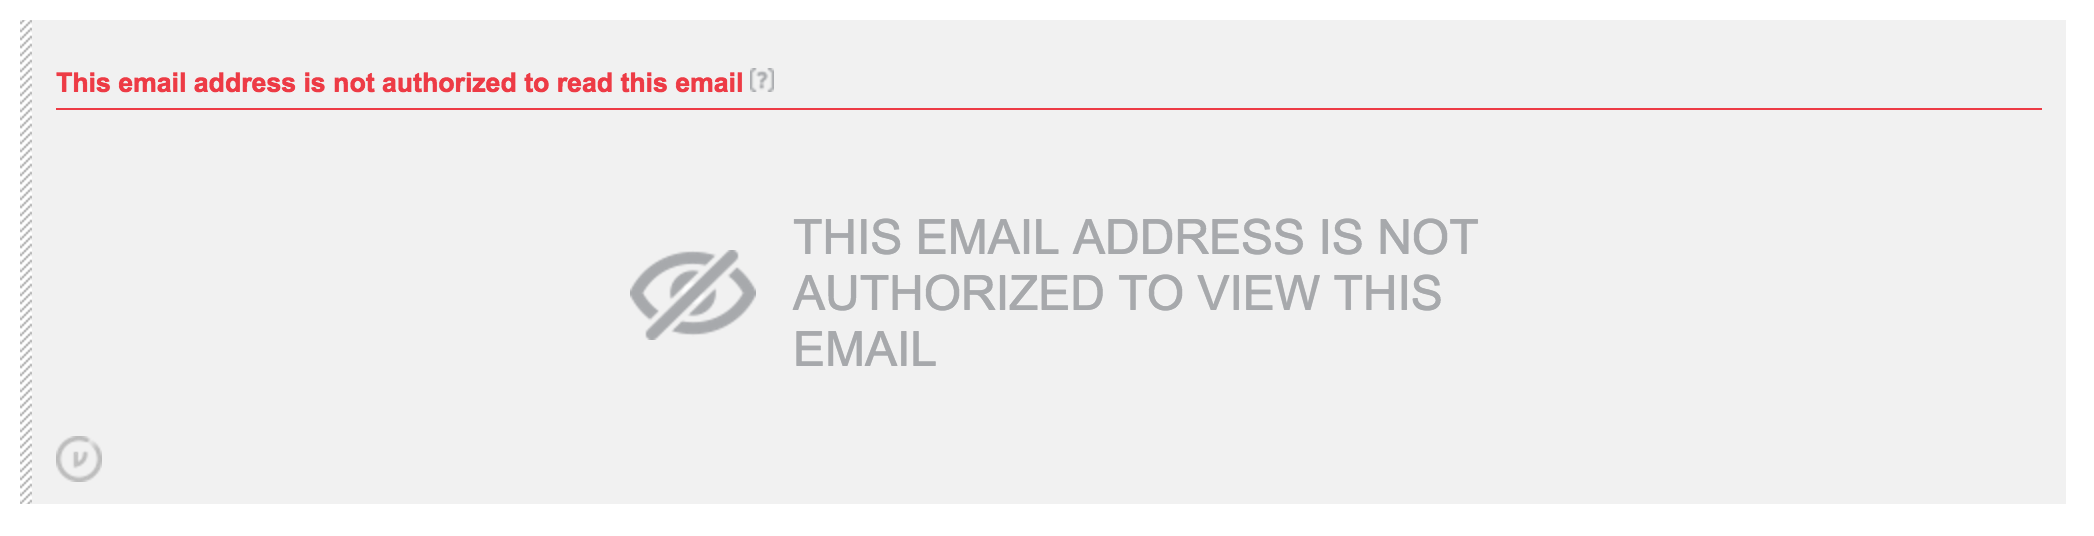 This email address is not authorized to view this email error message in Gmail